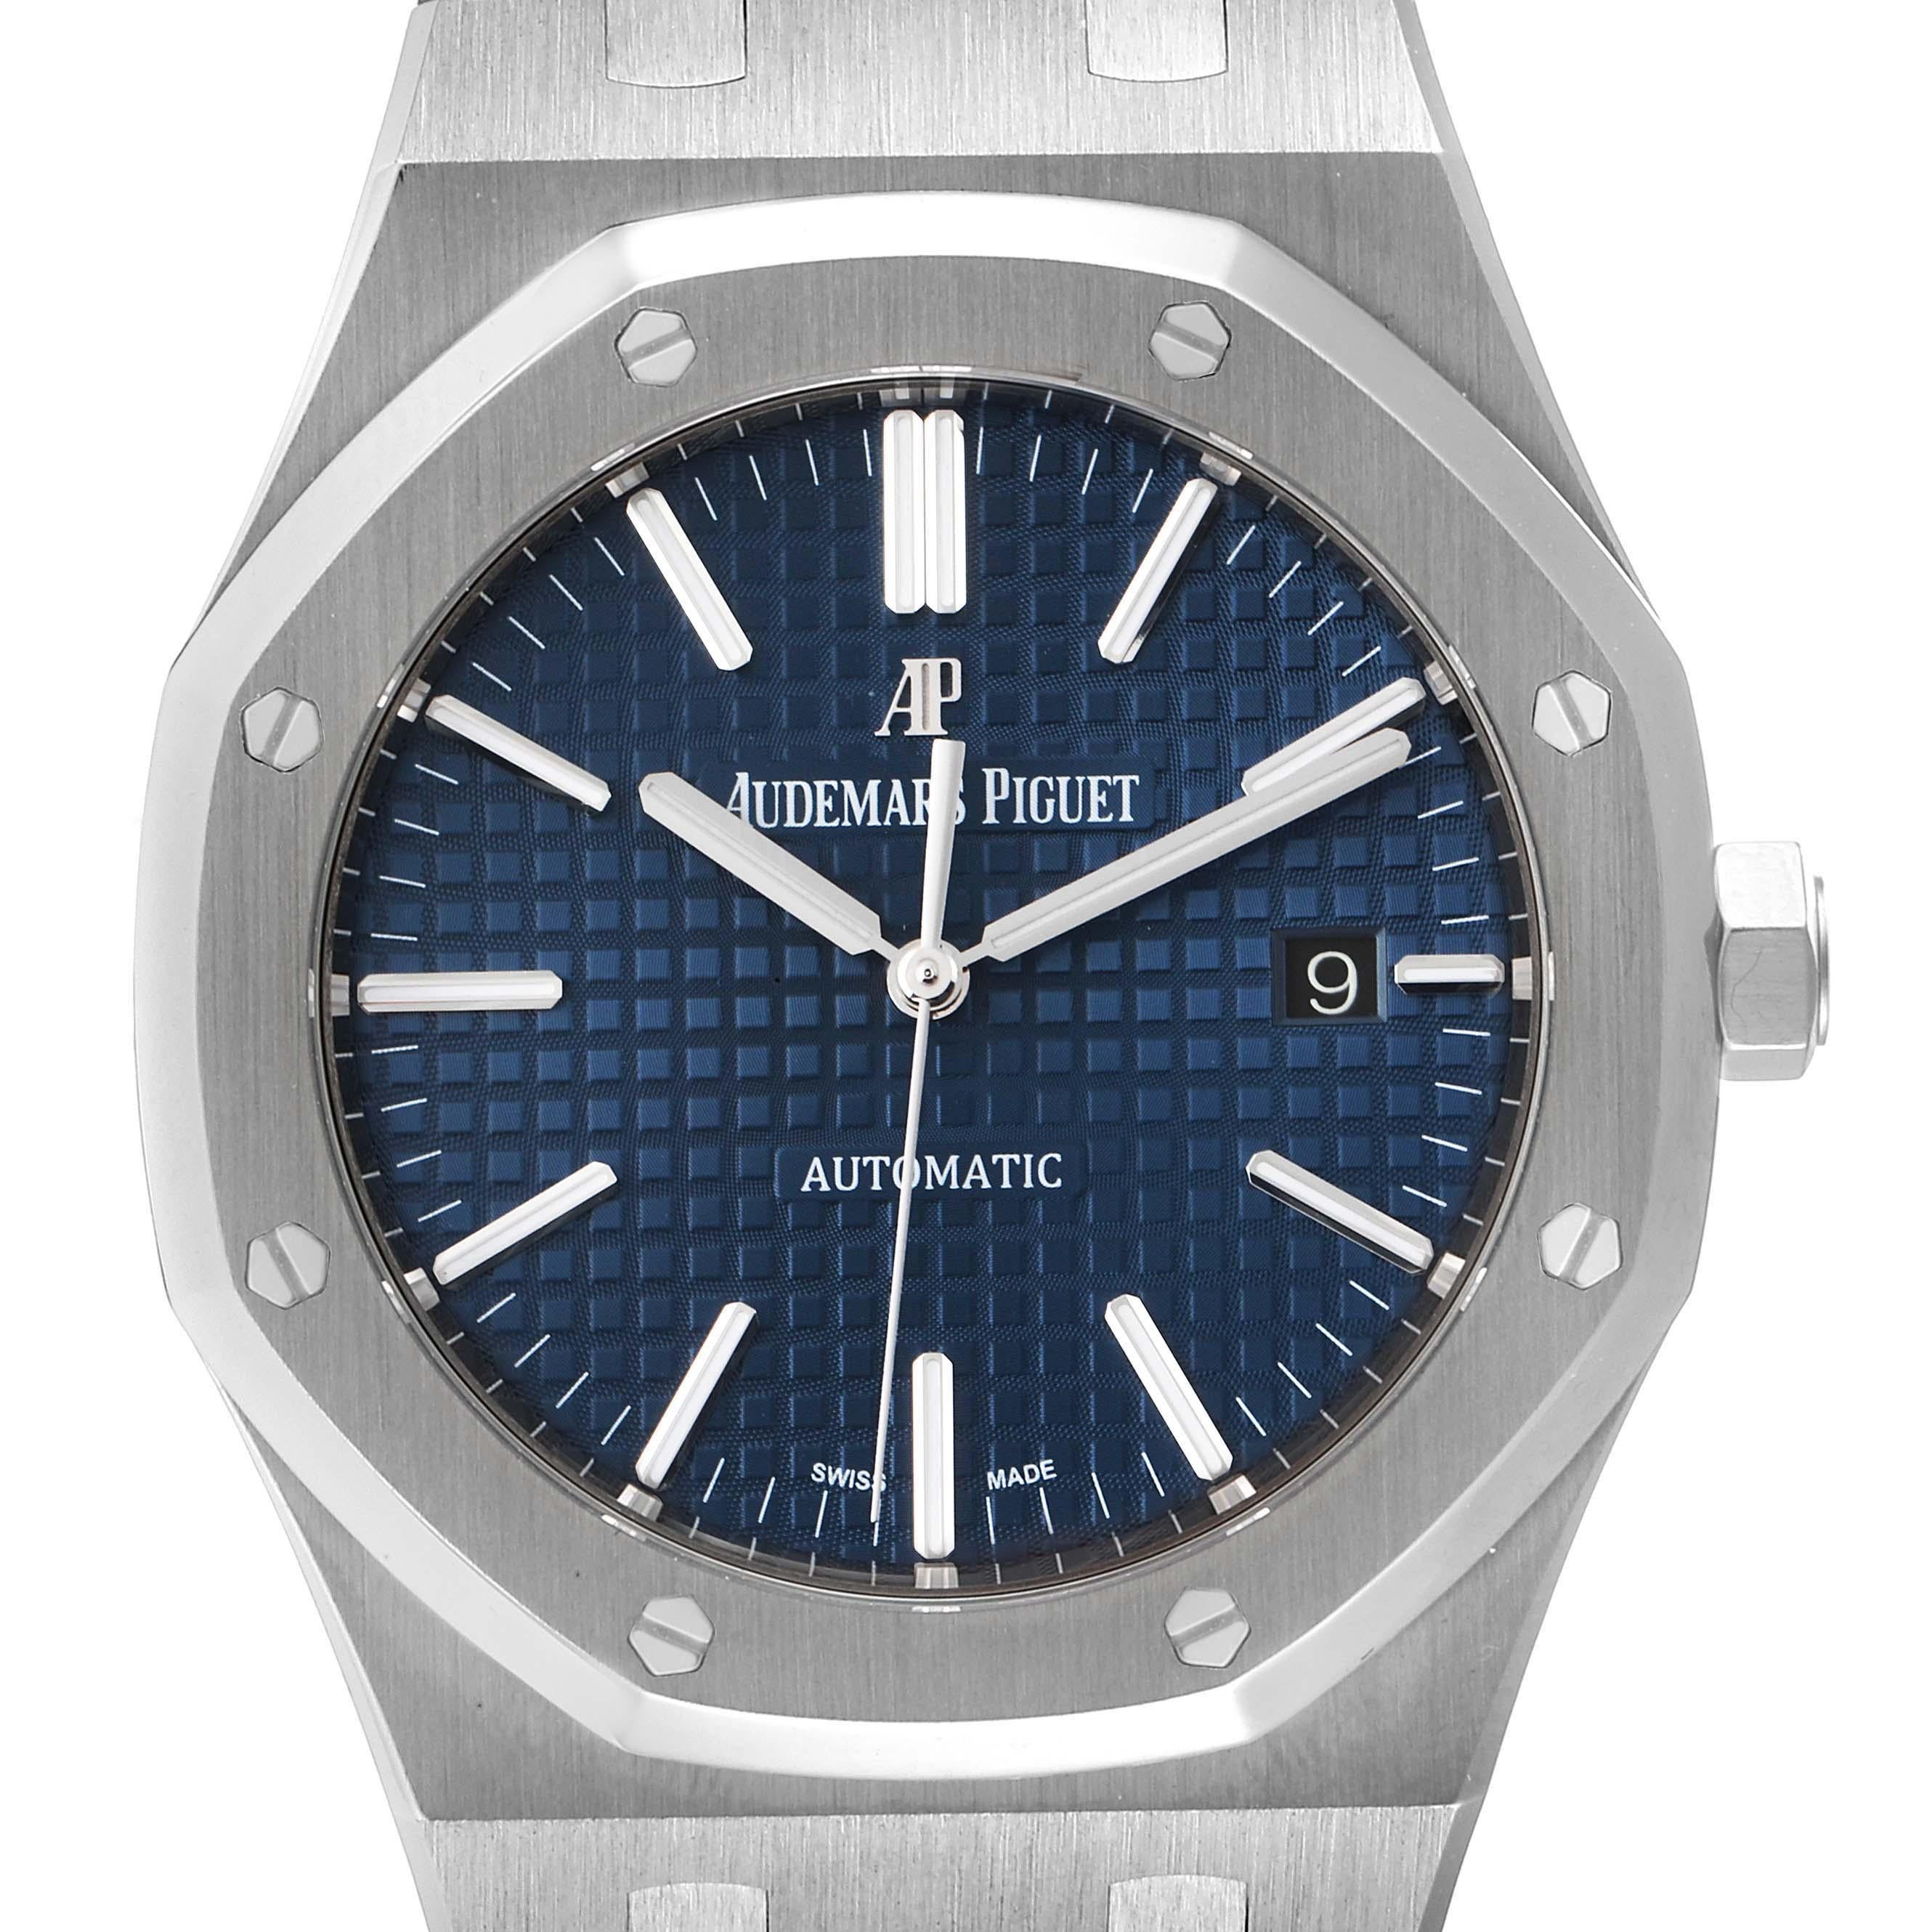 Audemars Piguet Royal Oak Blue Dial Steel Mens Watch 15400ST. Automatic self-winding movement. Stainless steel case 41.0 mm in diameter. Stainless steel bezel punctuated with 8 signature screws. Scratch resistant sapphire crystal. Blue tapisserie